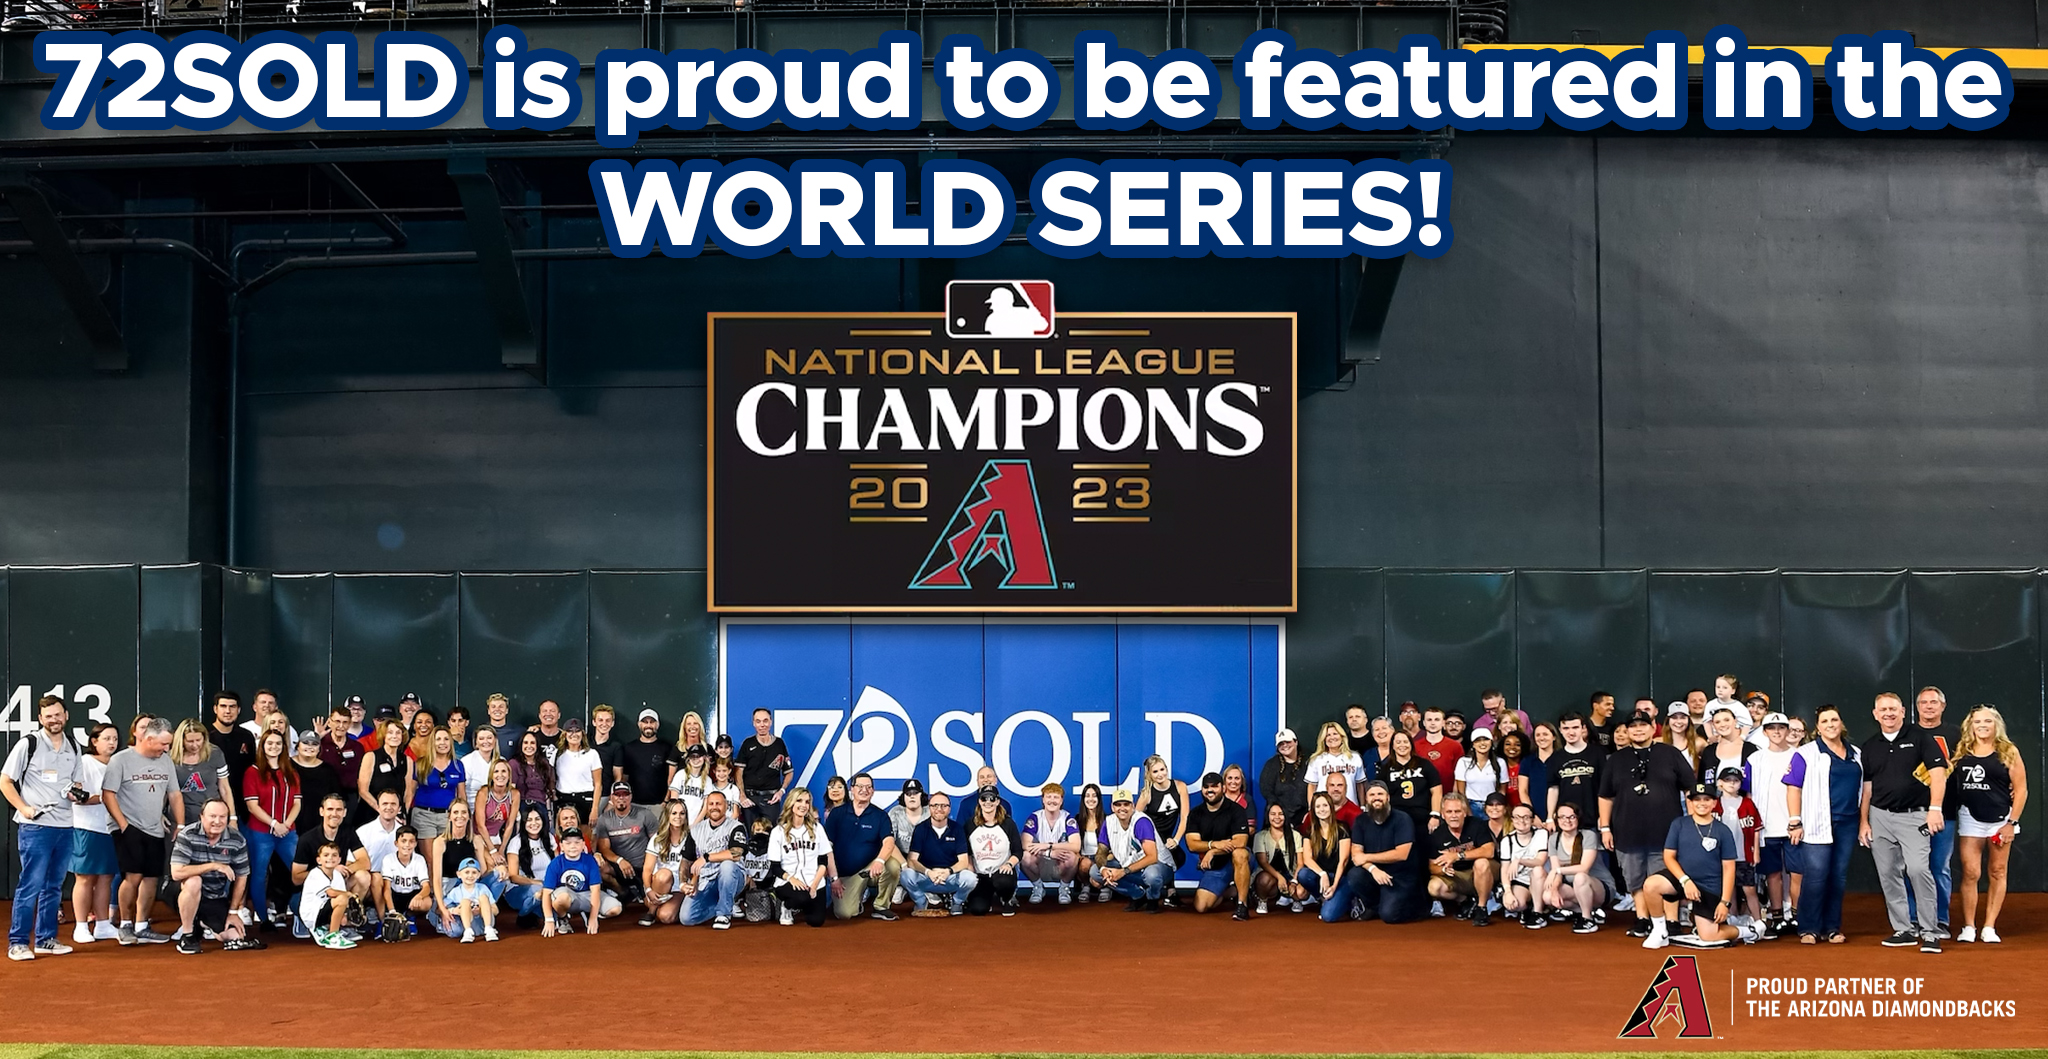 72SOLD Gets National Spotlight in the 2023 World Series